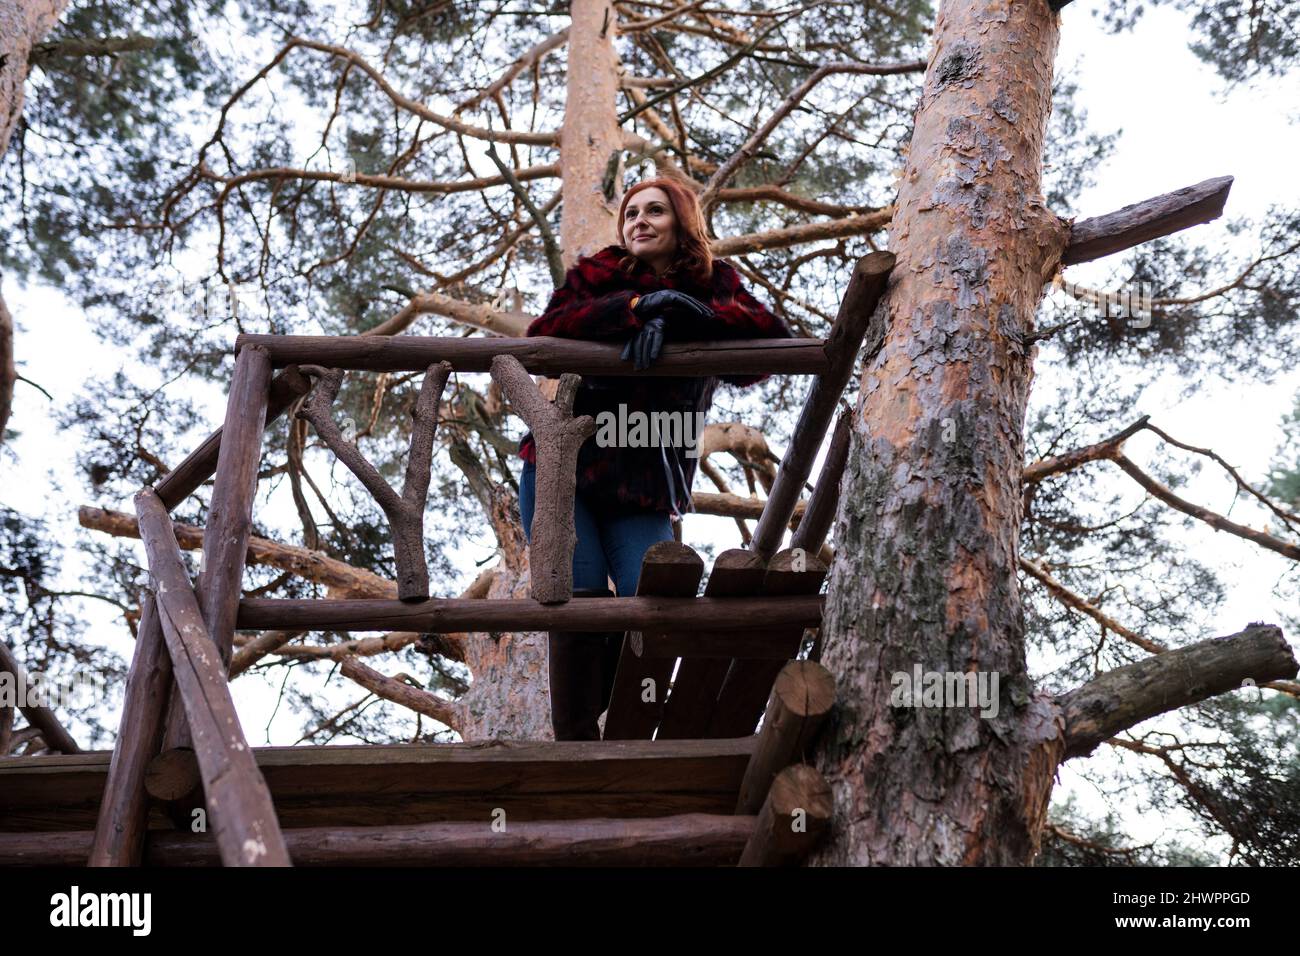 Woman day dreaming at tree house in forest Stock Photo